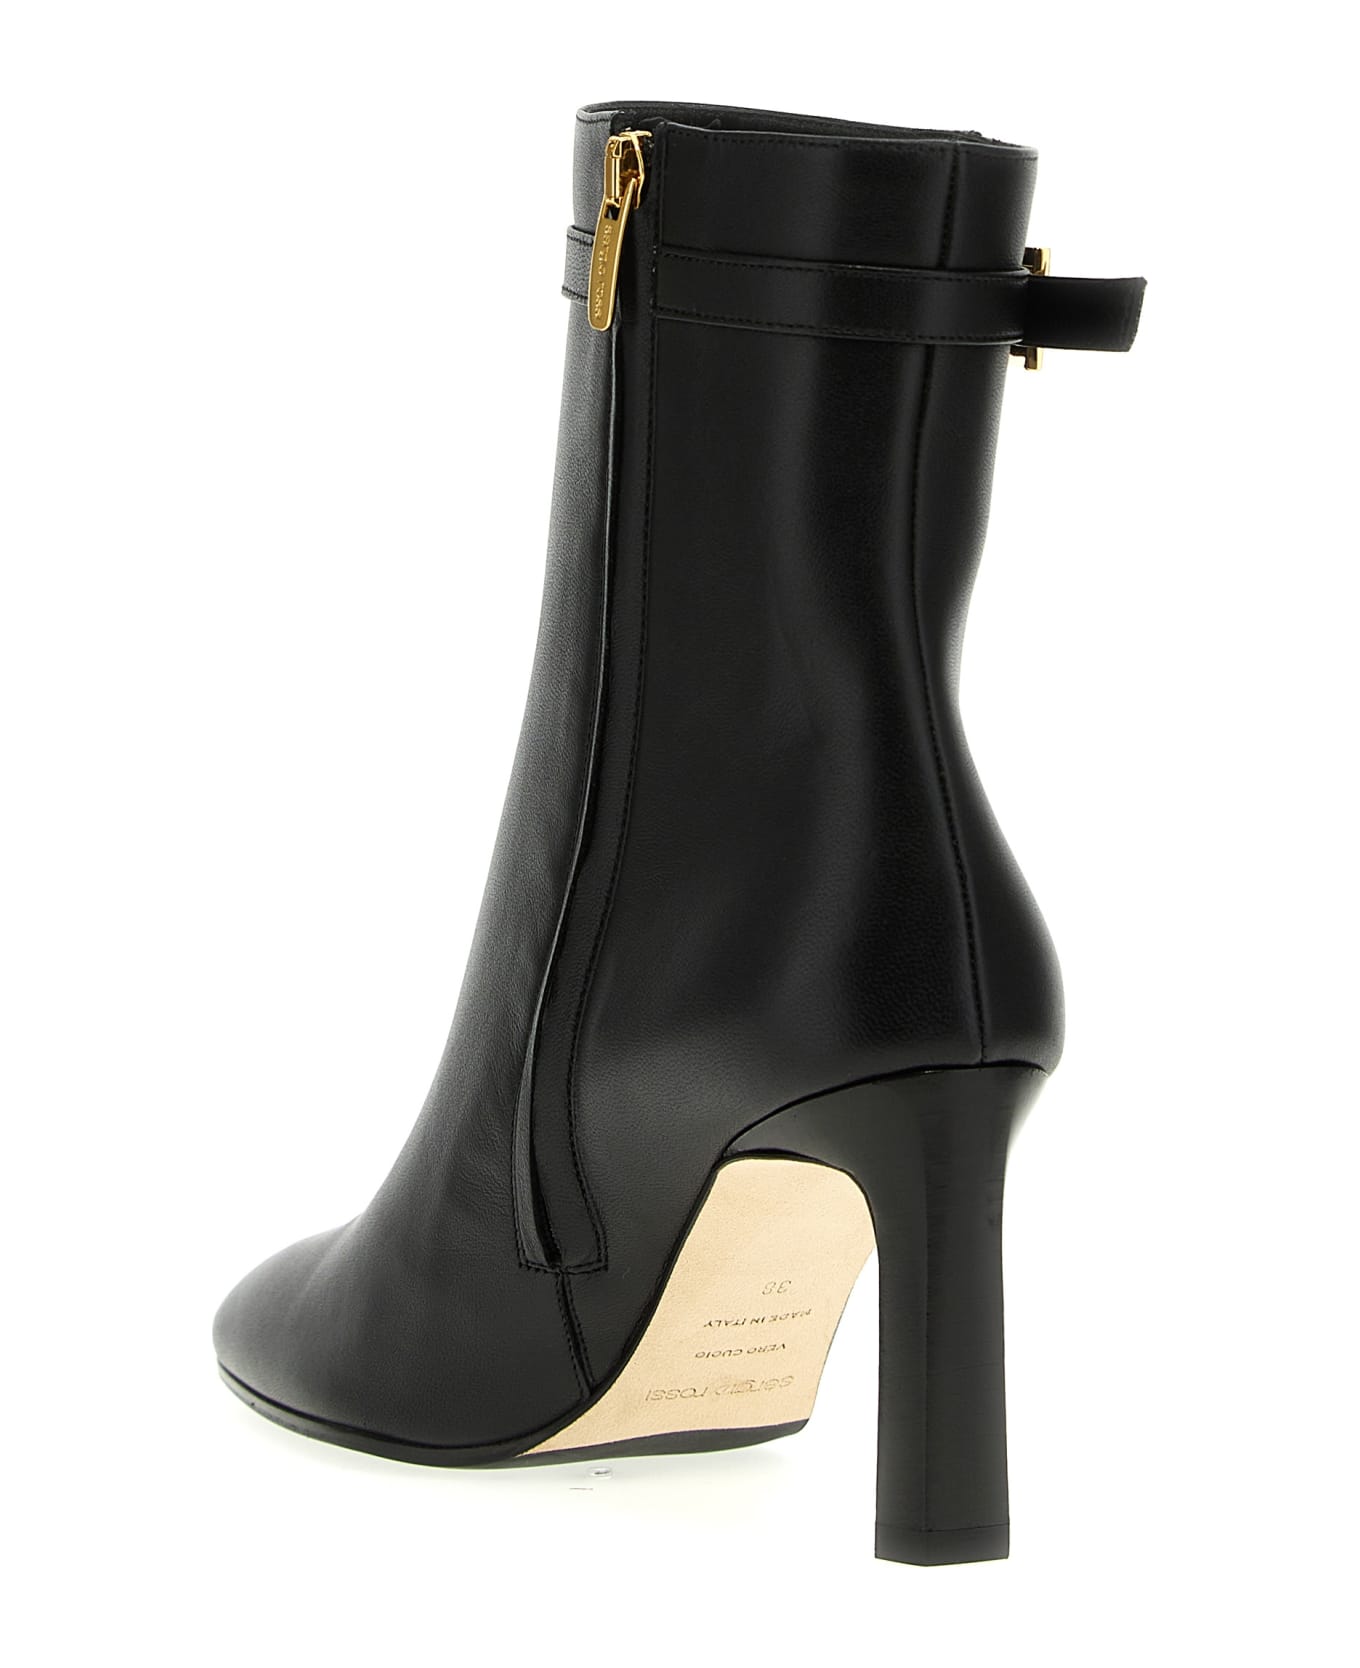 Sergio Rossi 'nora' Ankle Boots - Black  